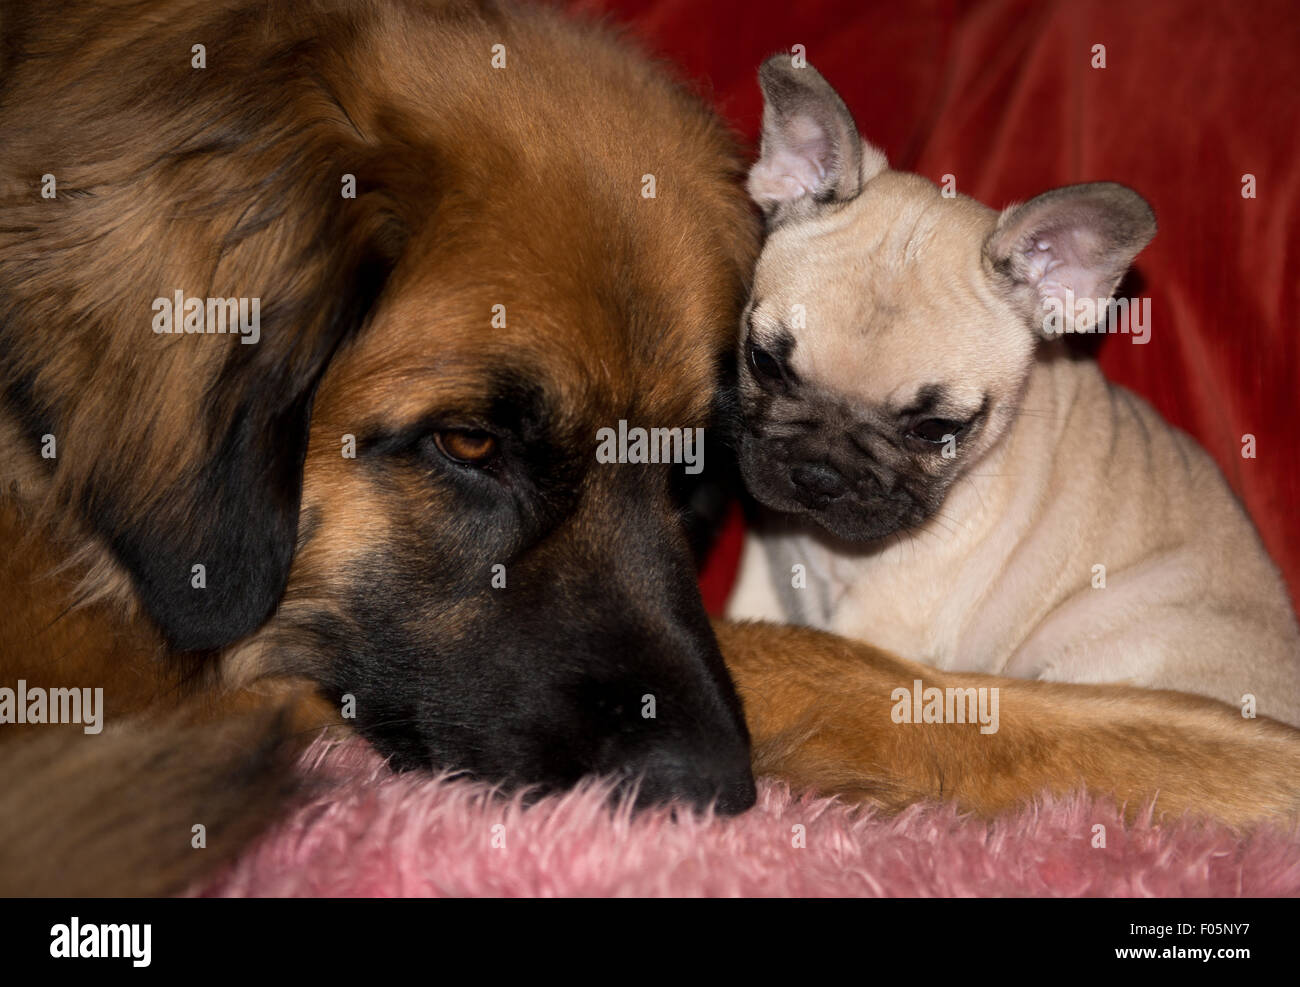 Large Breed Dog and Small Breed Puppy Stock Photo